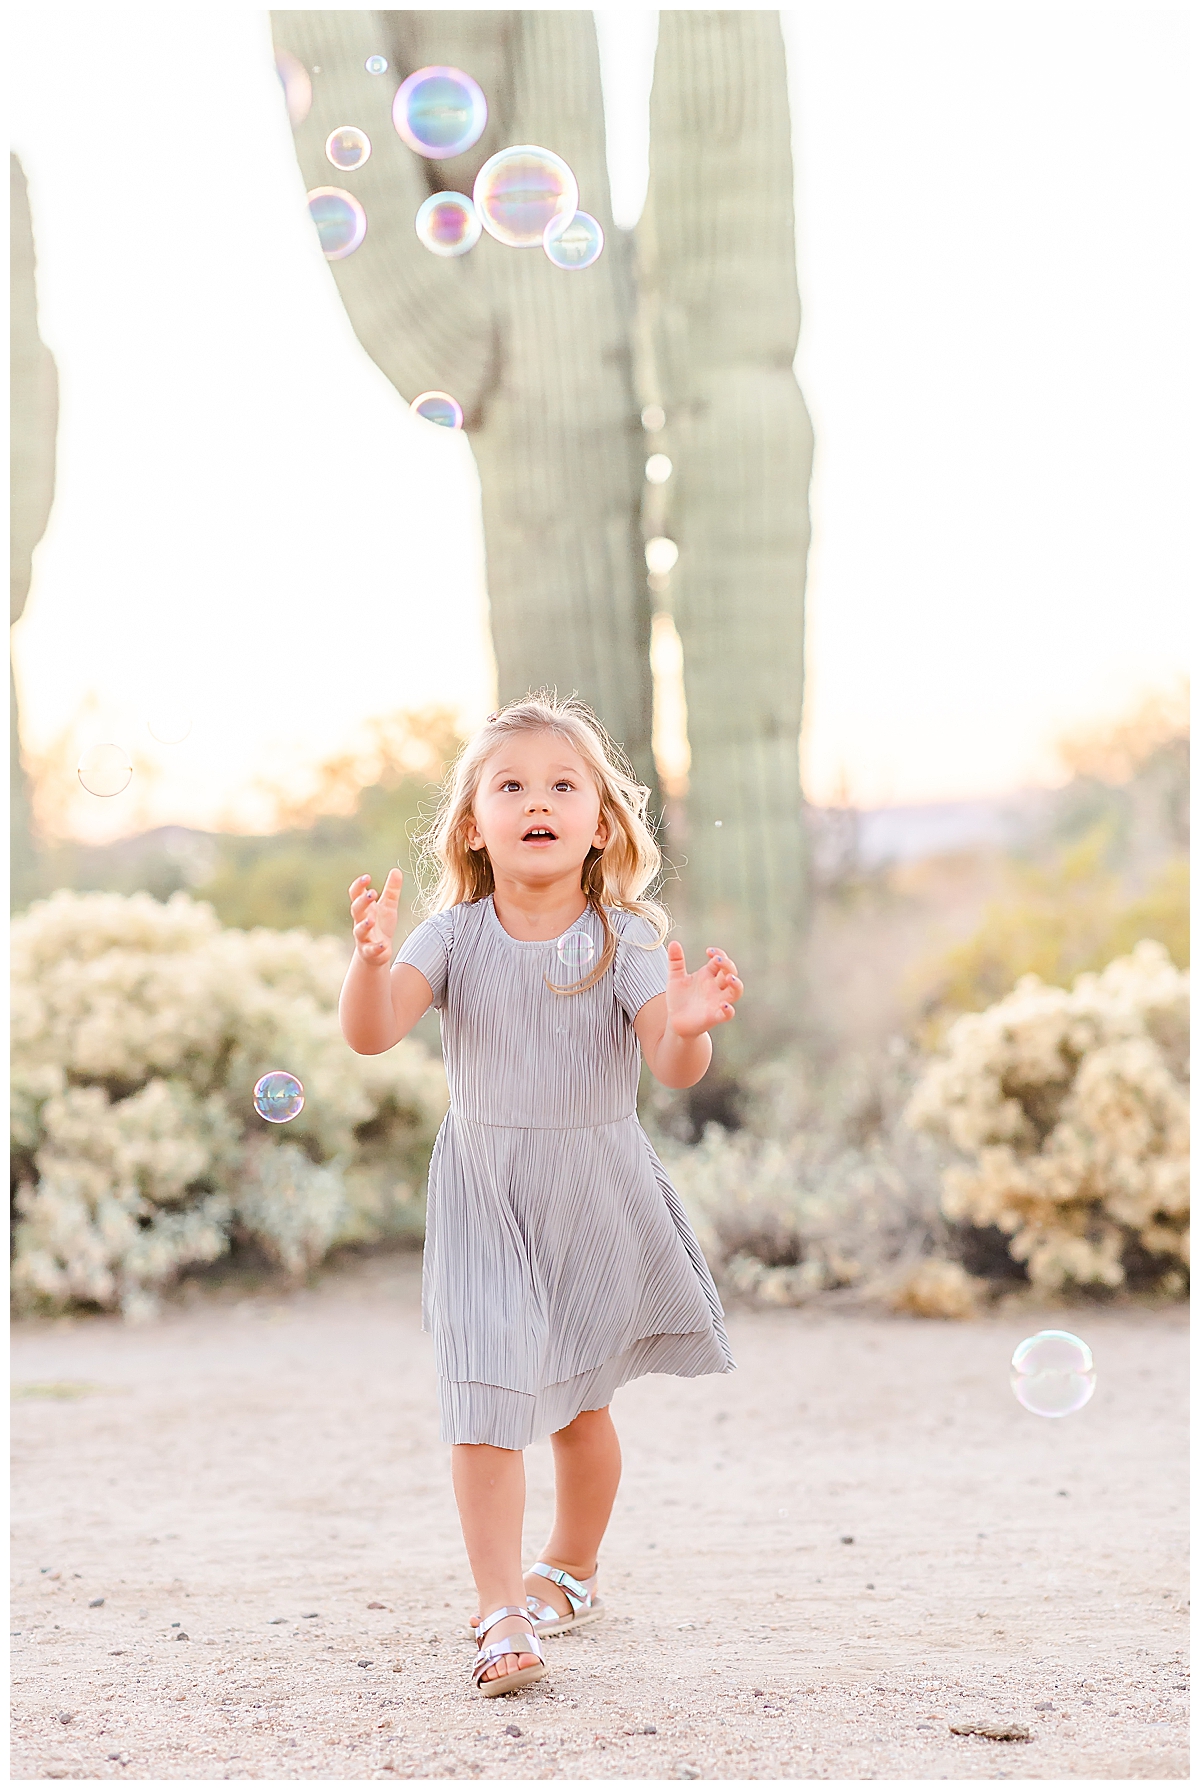 Girls dancing with bubbles in the desert in Scottsdale, AZ photographed by Christine Deaton Creative